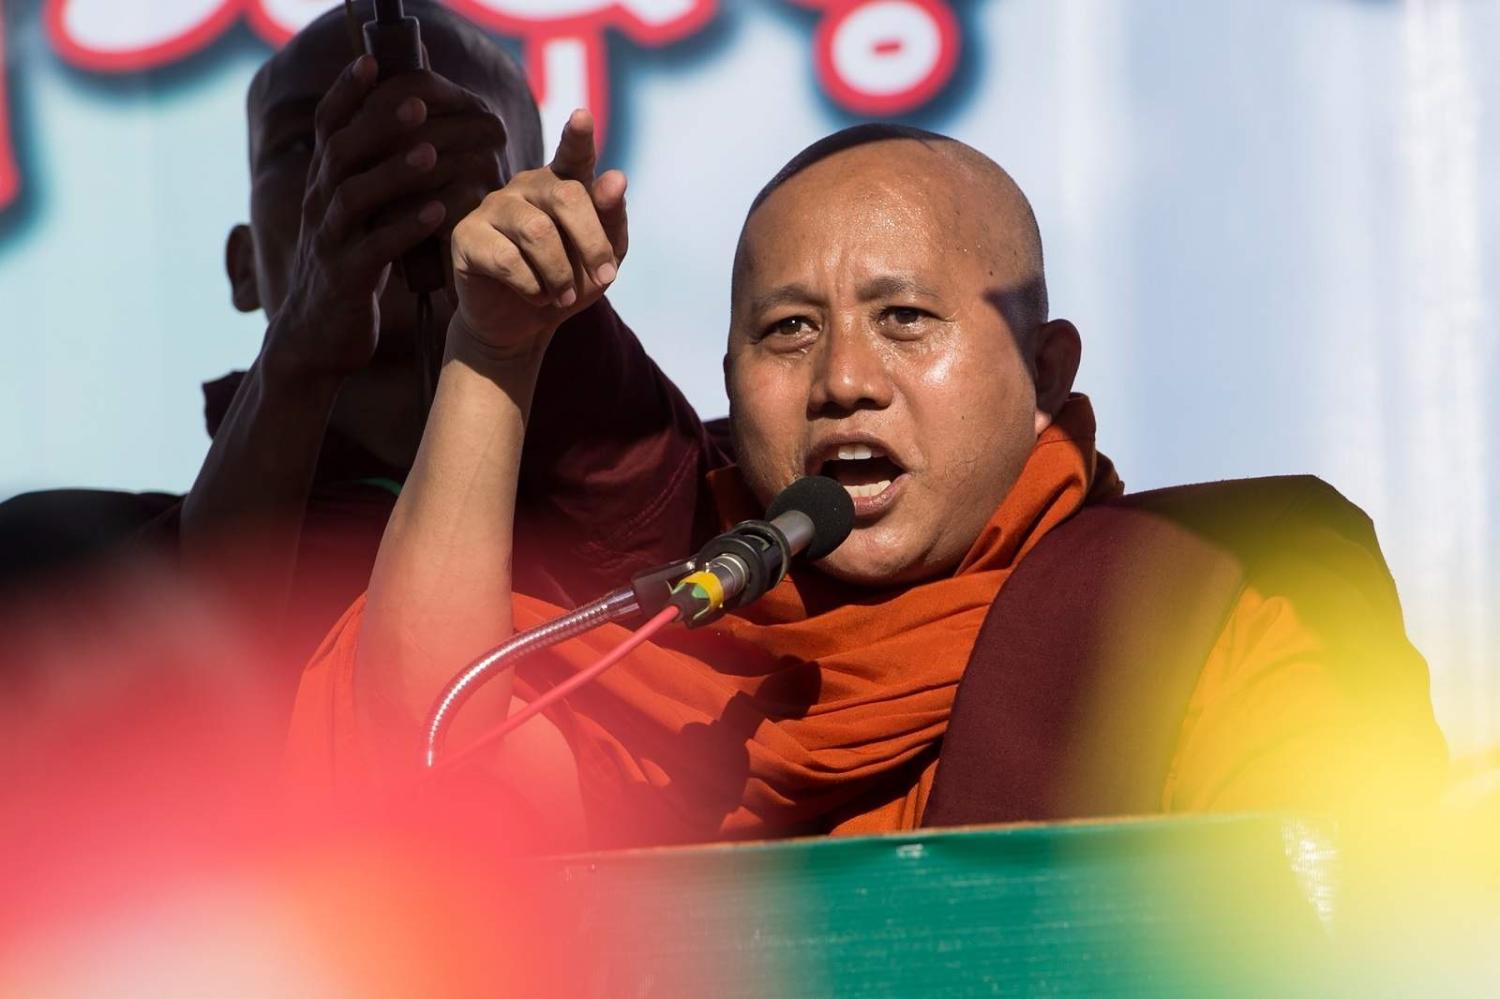 Buddhist monk Wirathu delivers a speech during a rally in support of Myanmar's military in Yangon, October 2018 (Ye Aung Thu/AFP via Getty Images)